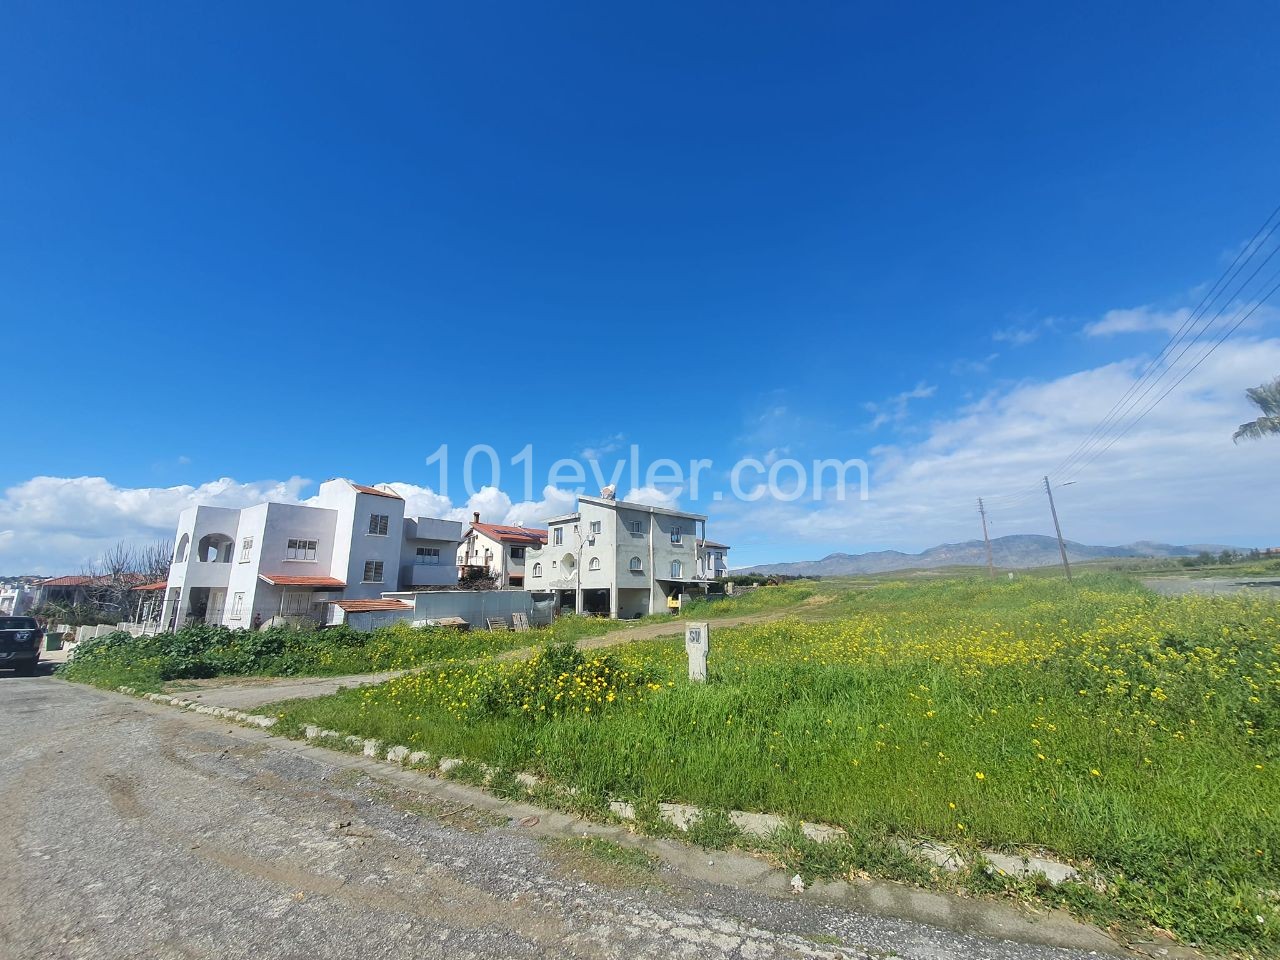 CORNER LAND SUITABLE FOR CONSTRUCTION OF 2 FLOOR VILLA AND 2 FLOOR APARTMENT IN 8800 A2 BÜYÜKLÜG, WITH 2 FLOOR ZONE, IN THE CALM AND PEACEFUL AREA OF GÖNYELİN ** 